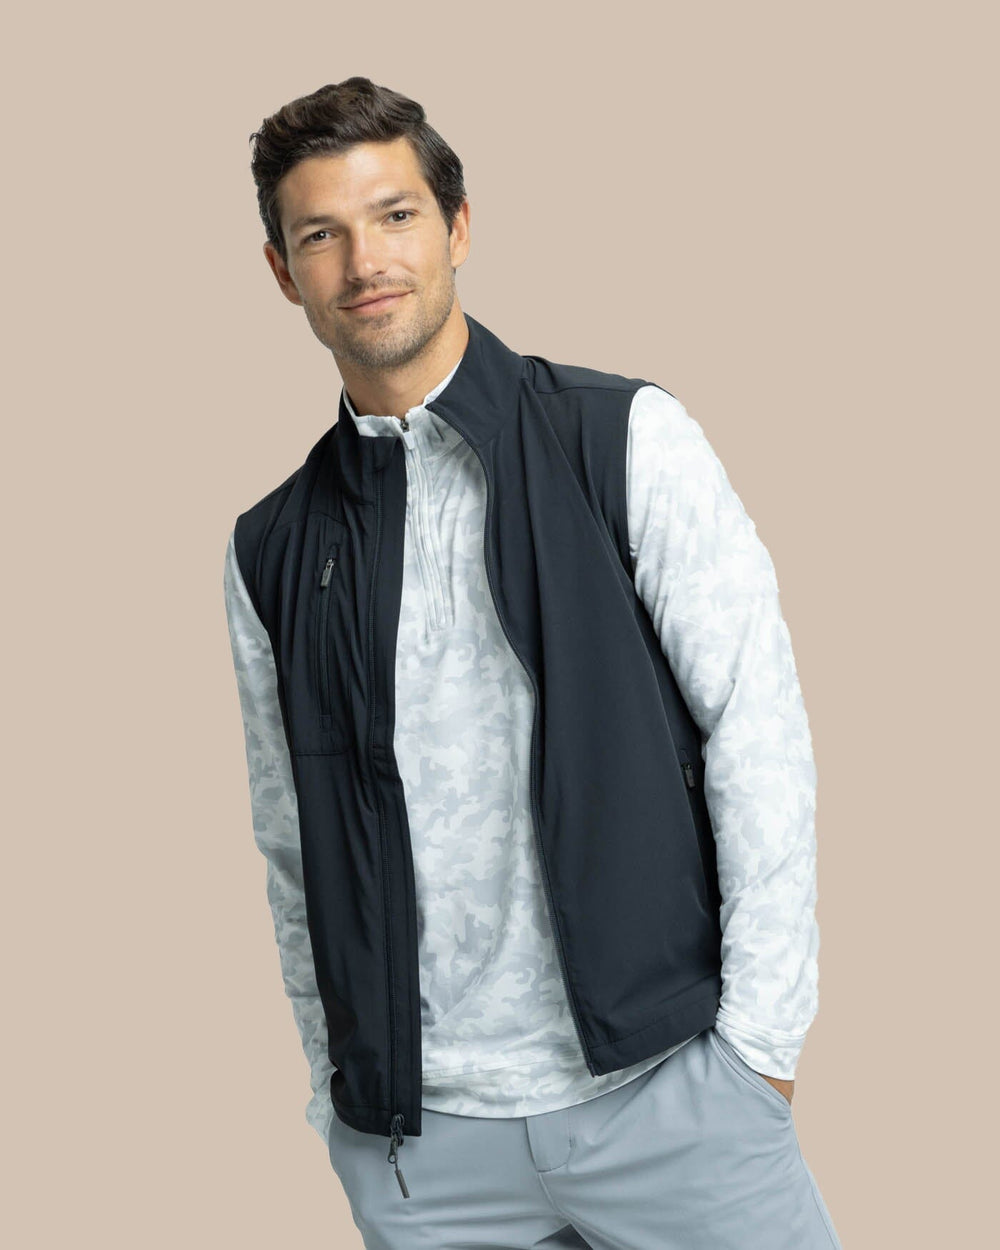 The front view of the Southern Tide Bowline Performance Vest by Southern Tide - Caviar Black